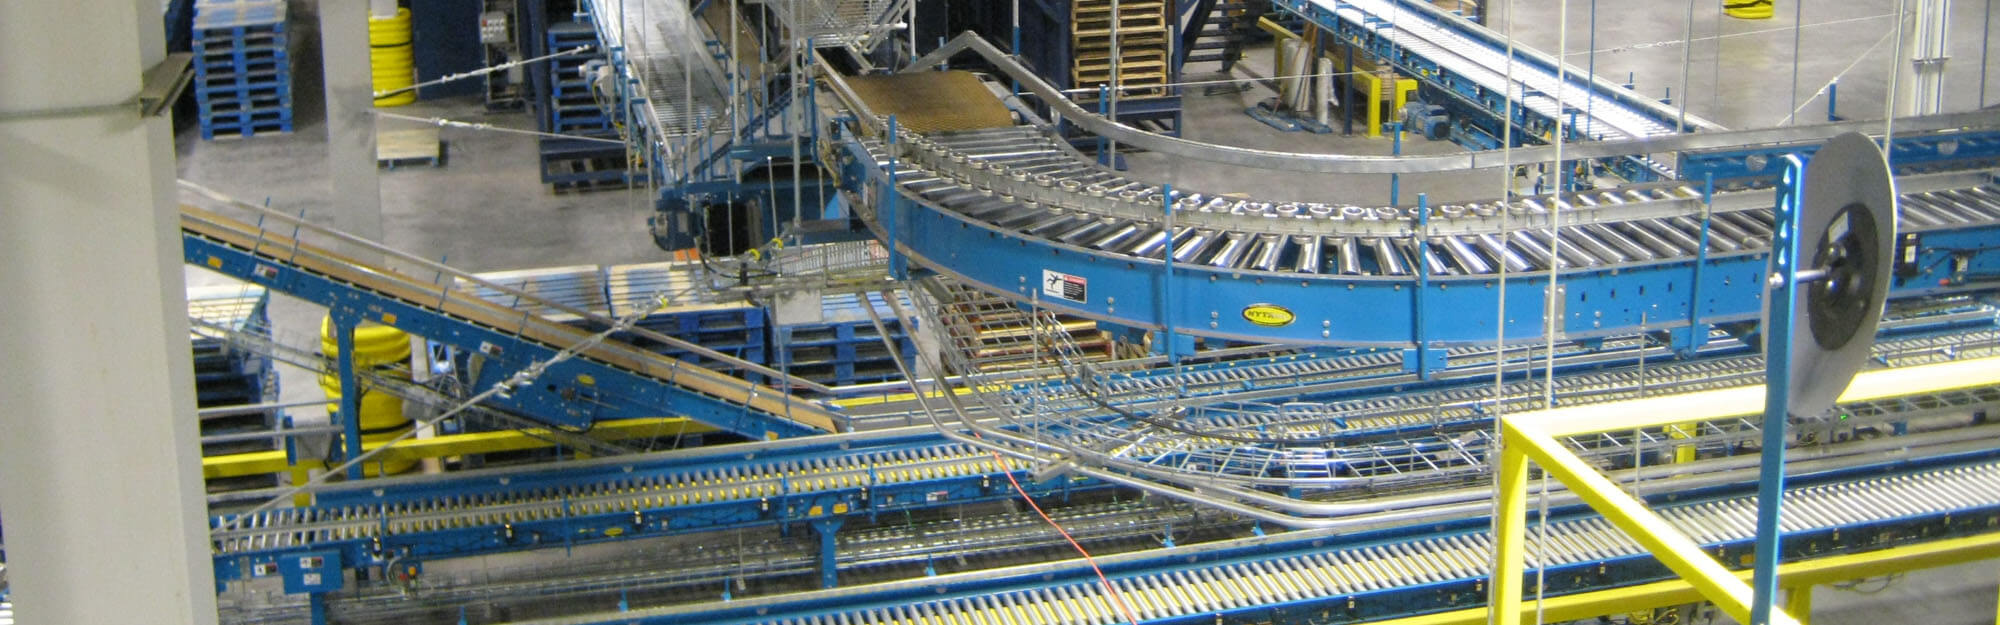 Boxed Conveyor System